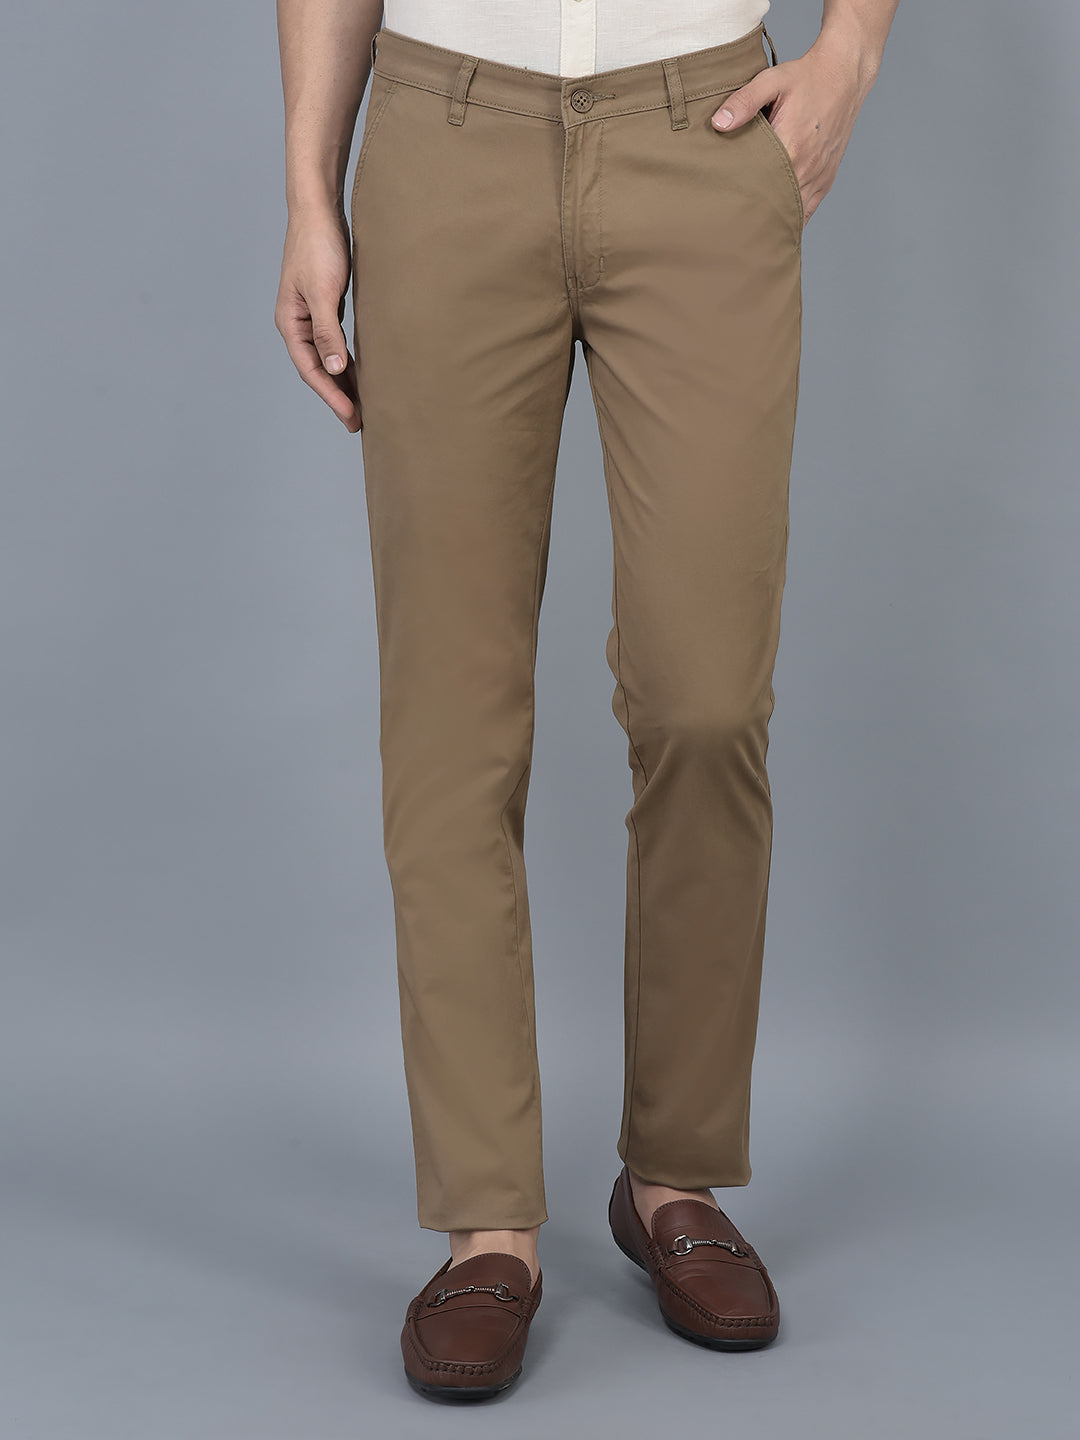 5 Khaki Chinos Outfits For Men  LIFESTYLE BY PS